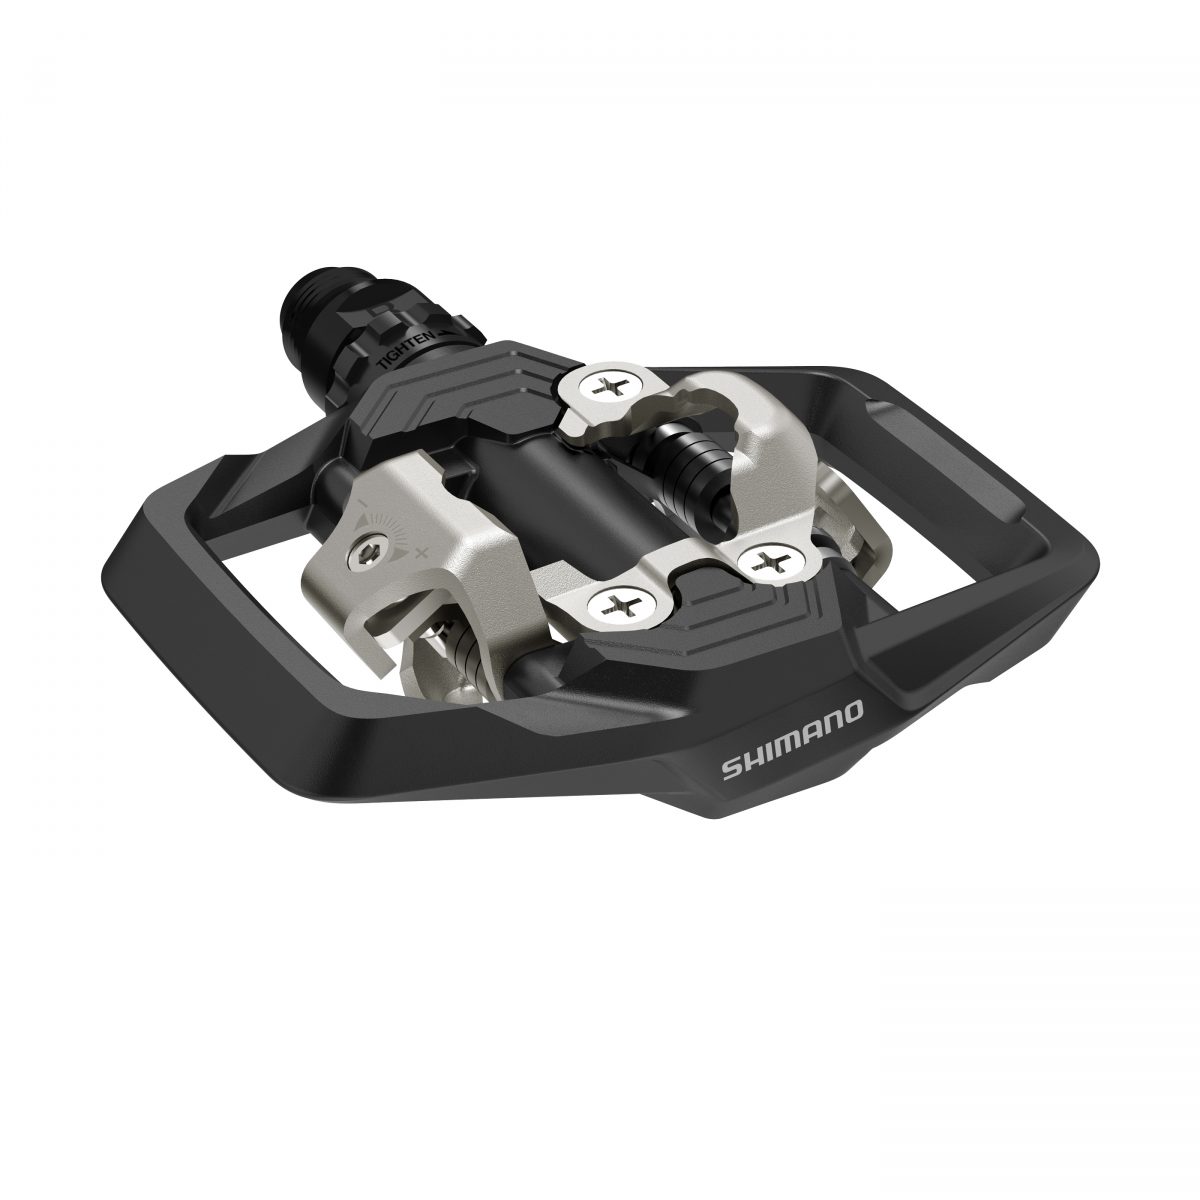 Shimano ME700 pedals